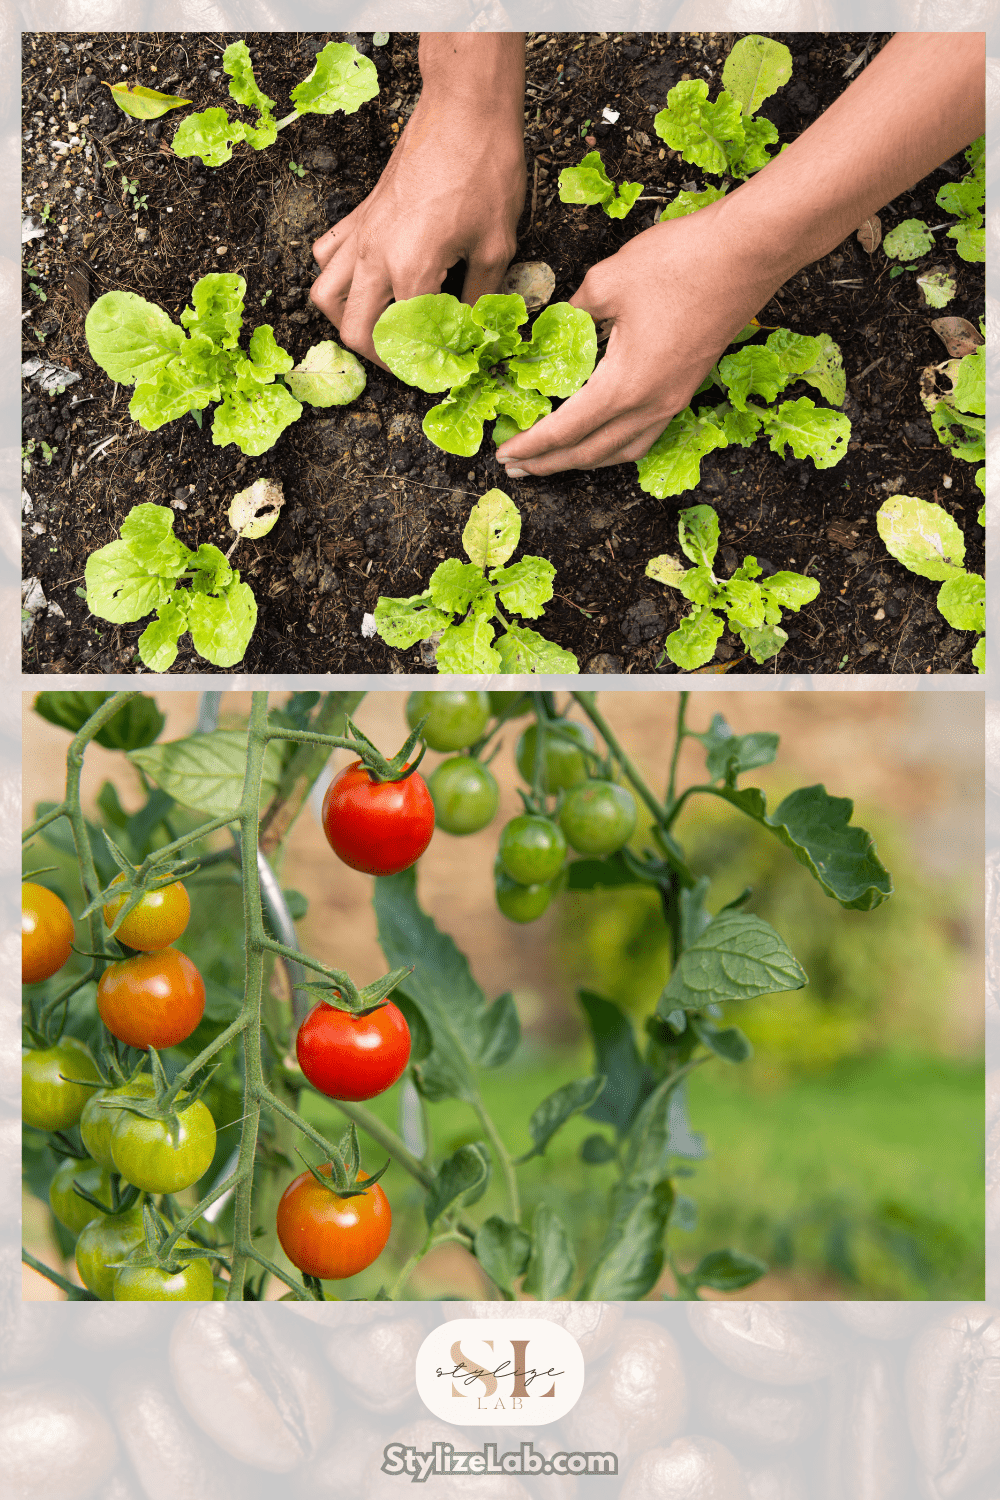 tomatoes and leafy greens - benefits using coffee grounds in